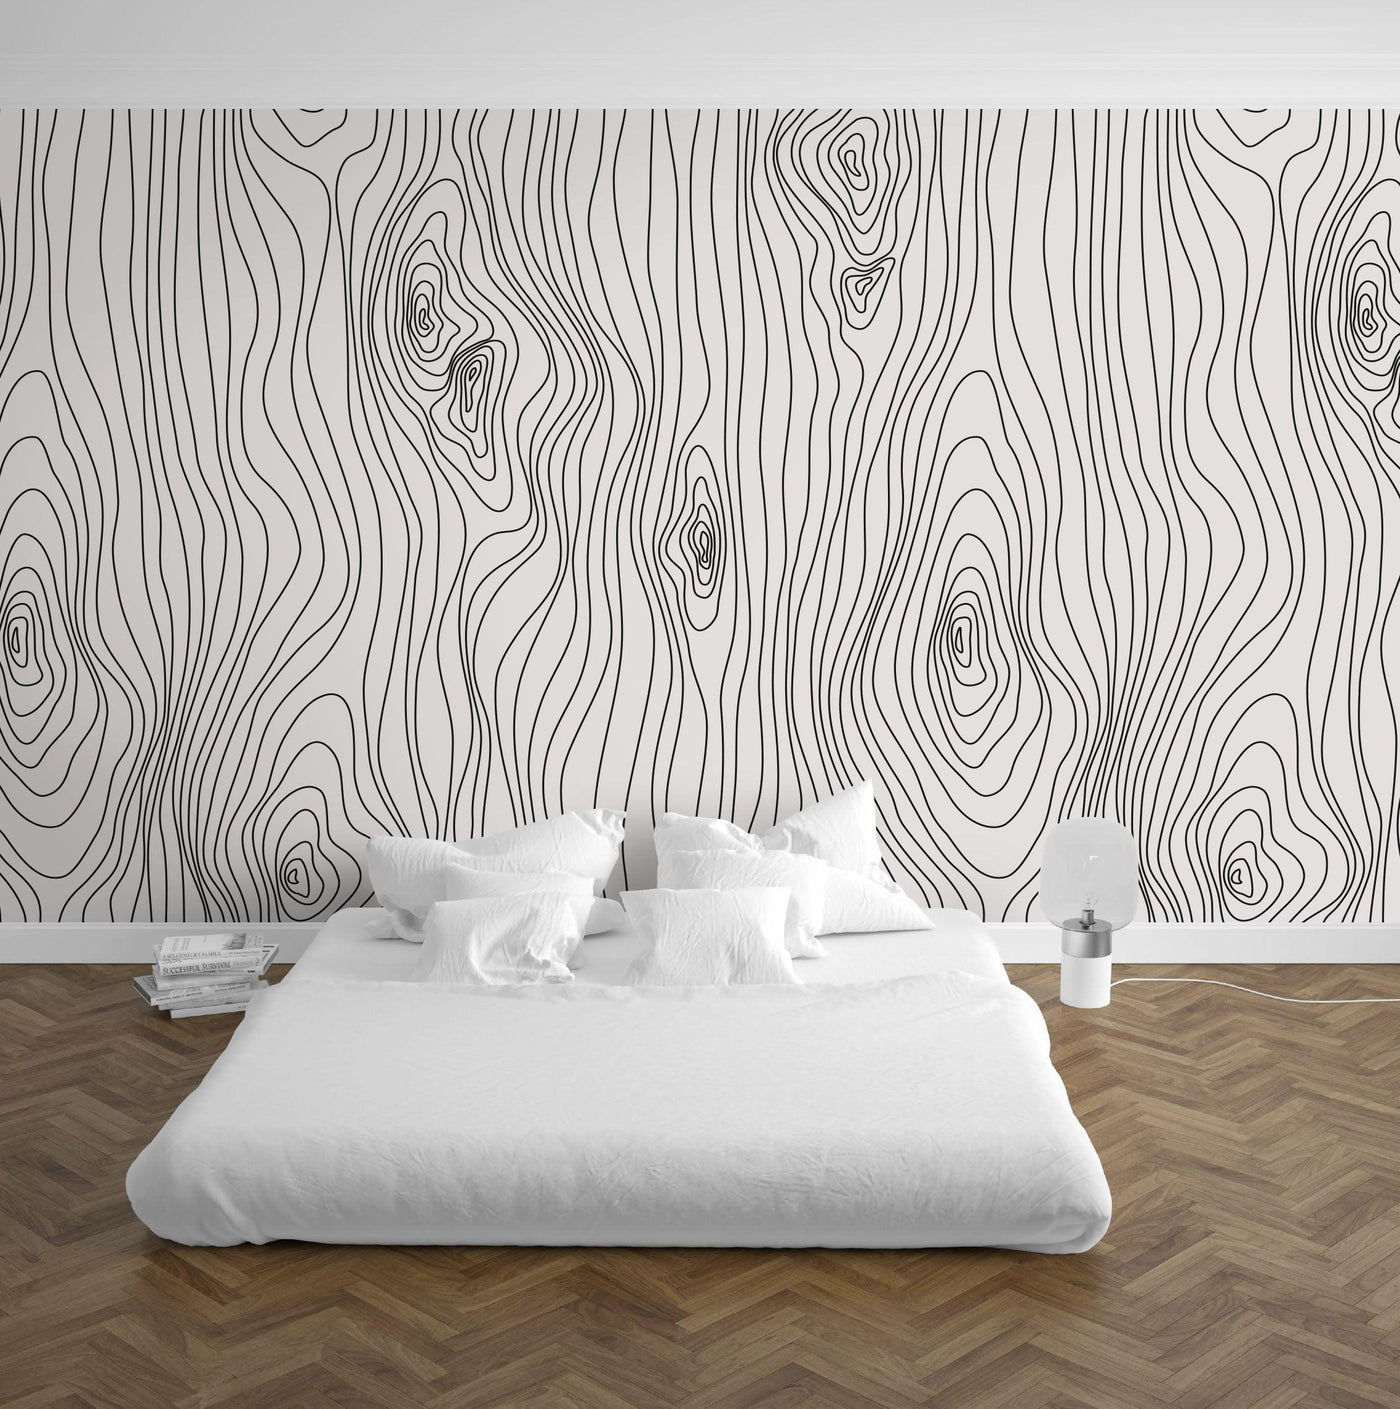 Wood Lines Mural Wallpaper (m²)-Wall Decor-ABSTRACT WALLPAPERS, BLACK & WHITE WALLPAPER, DESIGN WALLPAPERS, MURALS, MURALS / WALLPAPERS, NATURE WALL ART, NON-WOVEN WALLPAPER, PATTERN WALLPAPERS-Forest Homes-Nature inspired decor-Nature decor